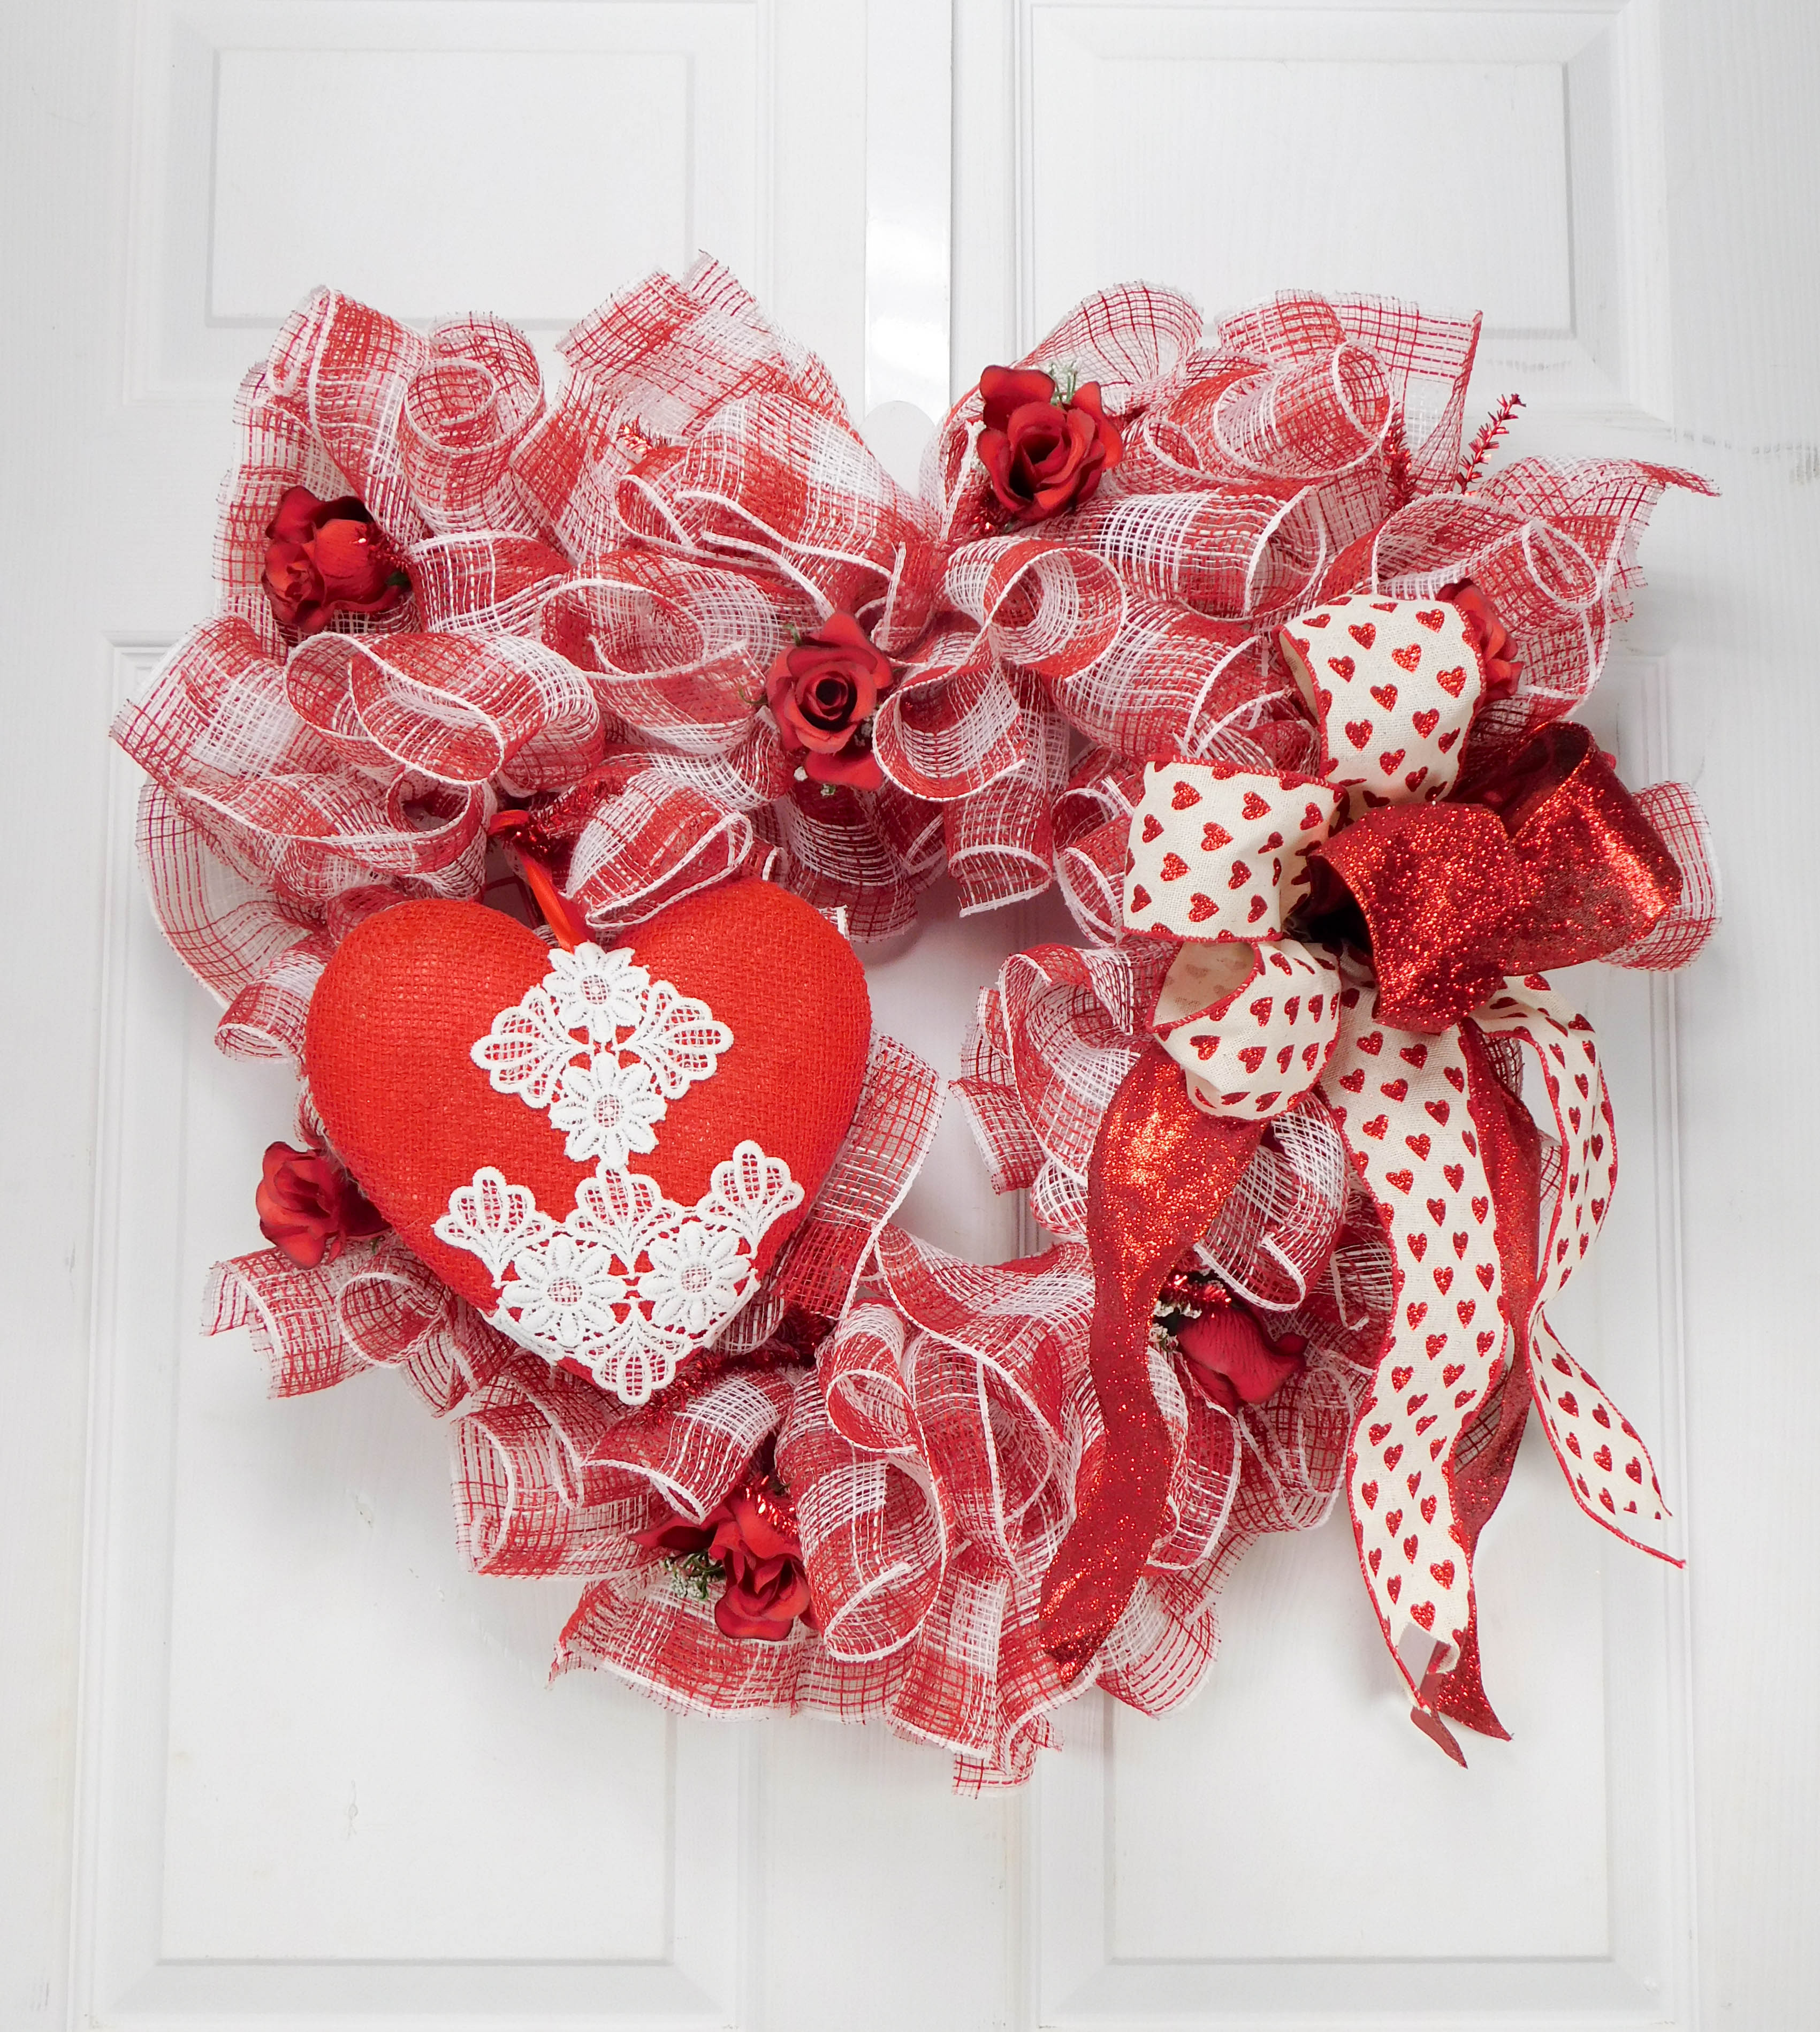 How to Make a Deco Mesh Wreath for Valentine's Day - How to Make